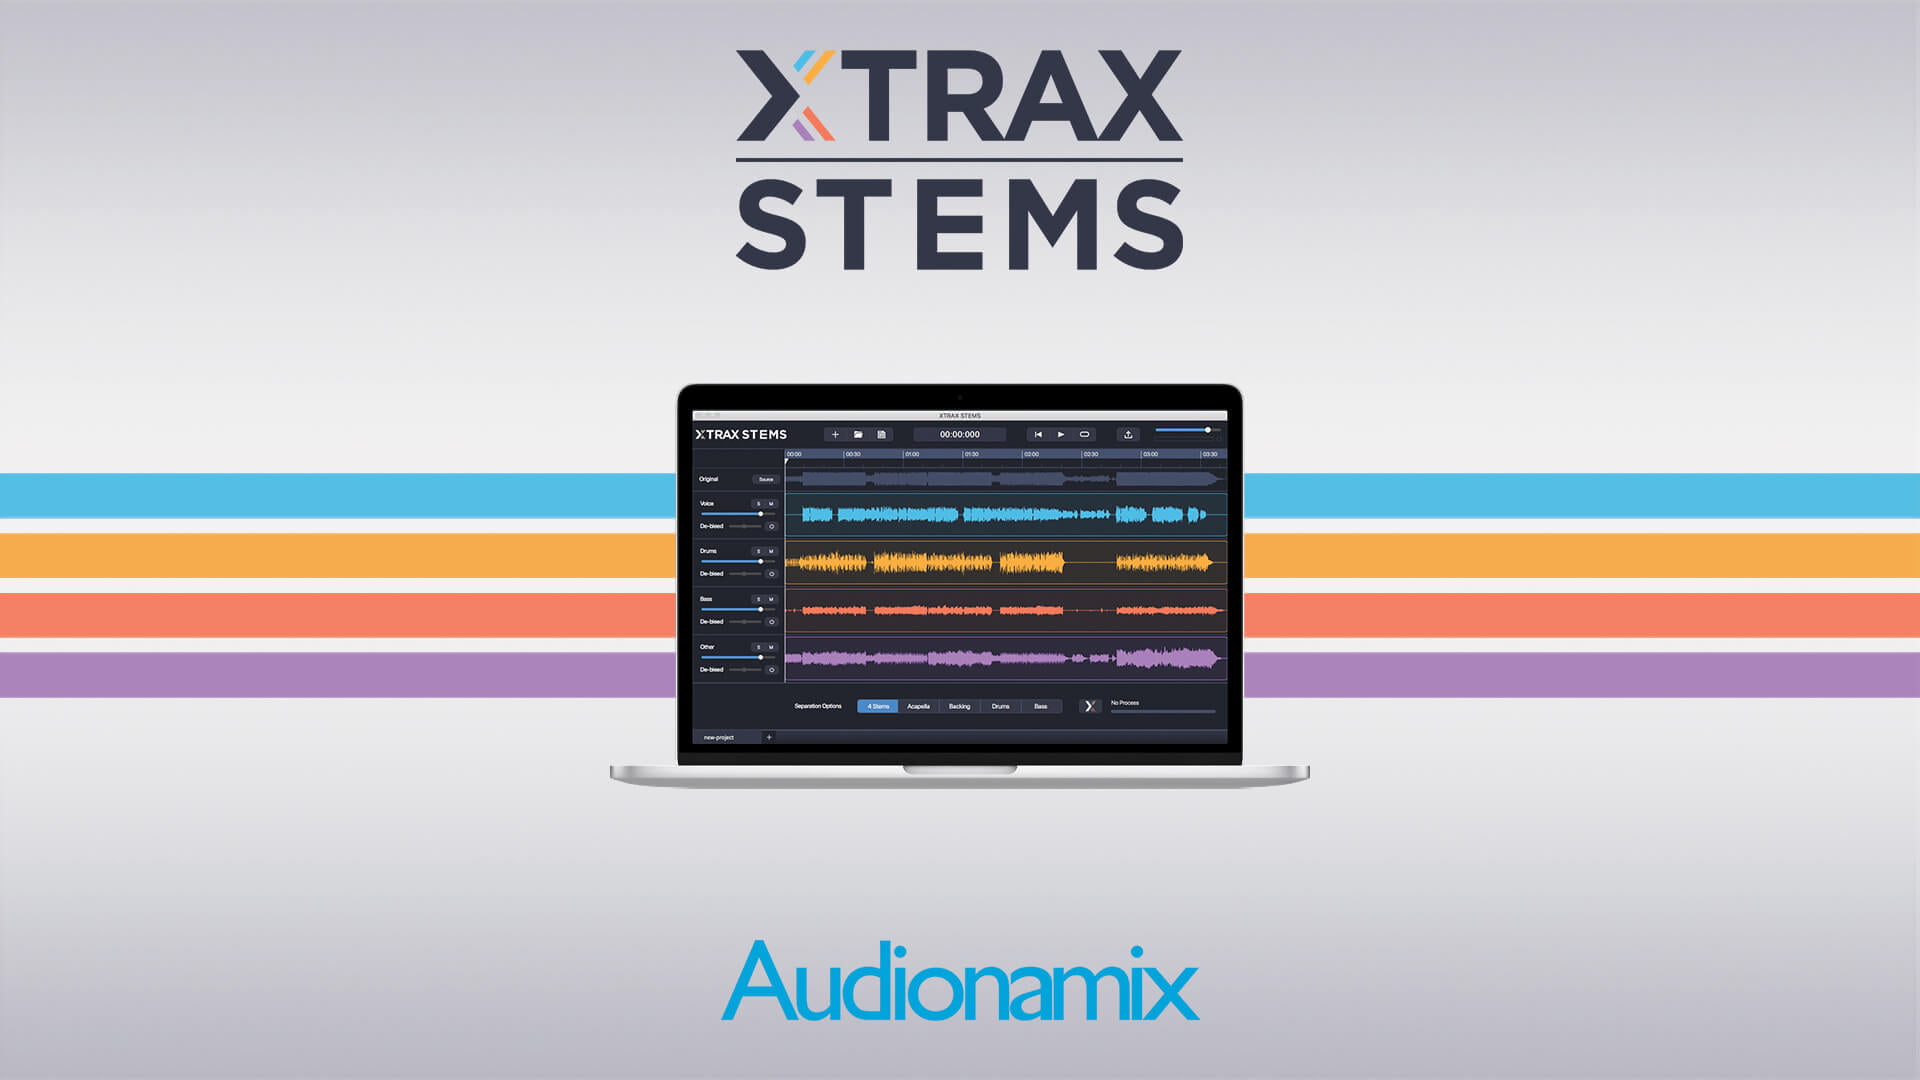 xtrax stems 2 free download crack